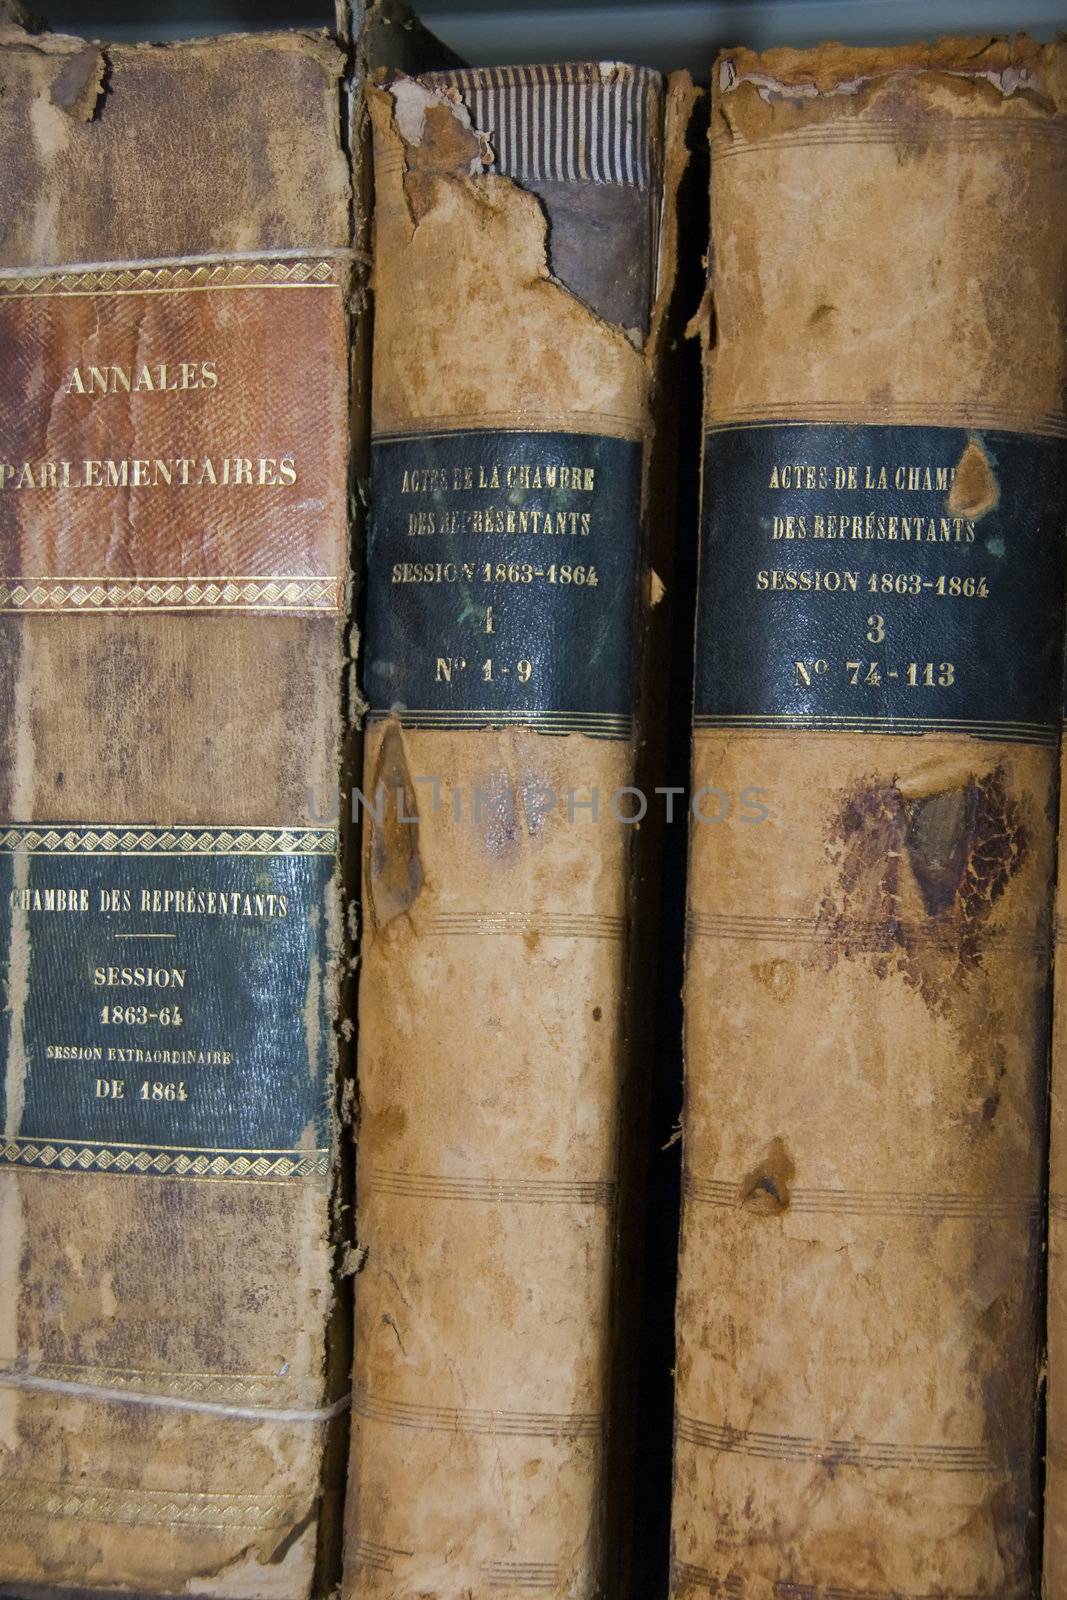 3 very old antique books, partly damaged by time, standing against neutral wall. Archives hold historical records of olden times.  These records are printed or written on, what are now very old papers, and kept in temperature-controlled rooms on racks. Consultation is only by permission and must be done in a controlled environment. The fragility of the papers demands a gentle handling. 